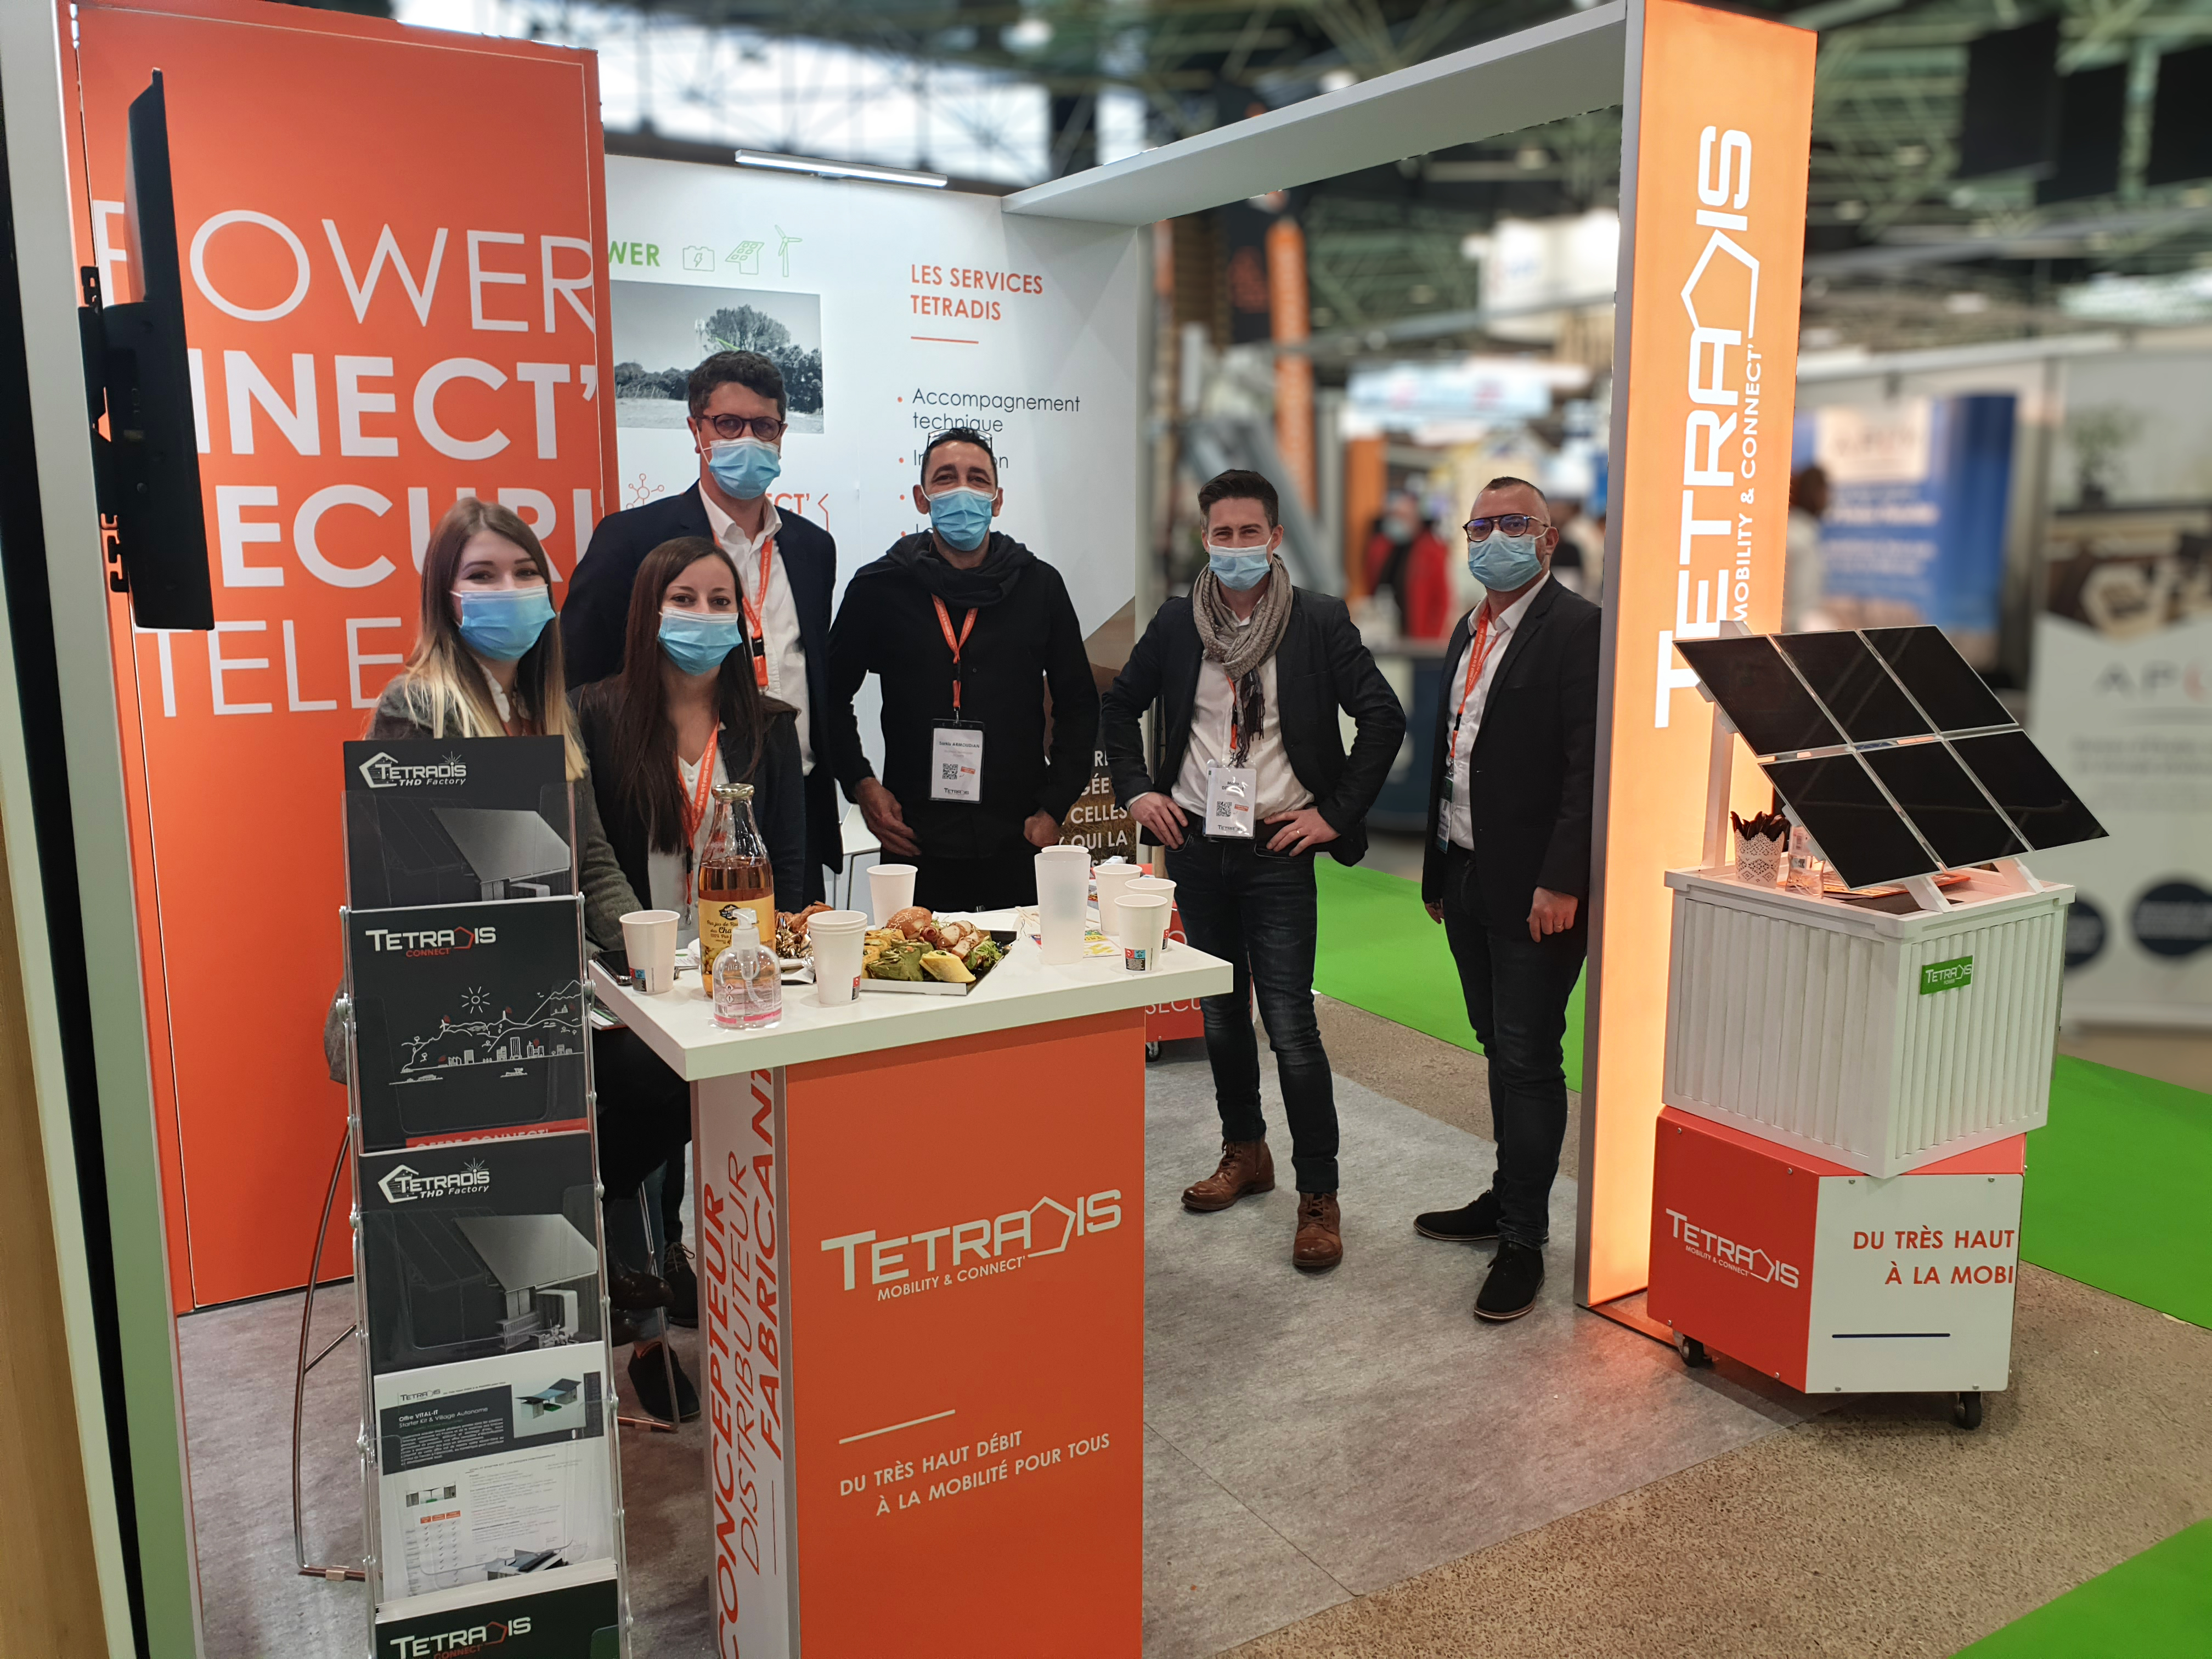 BePositive in Lyon : The energy transition exhibition